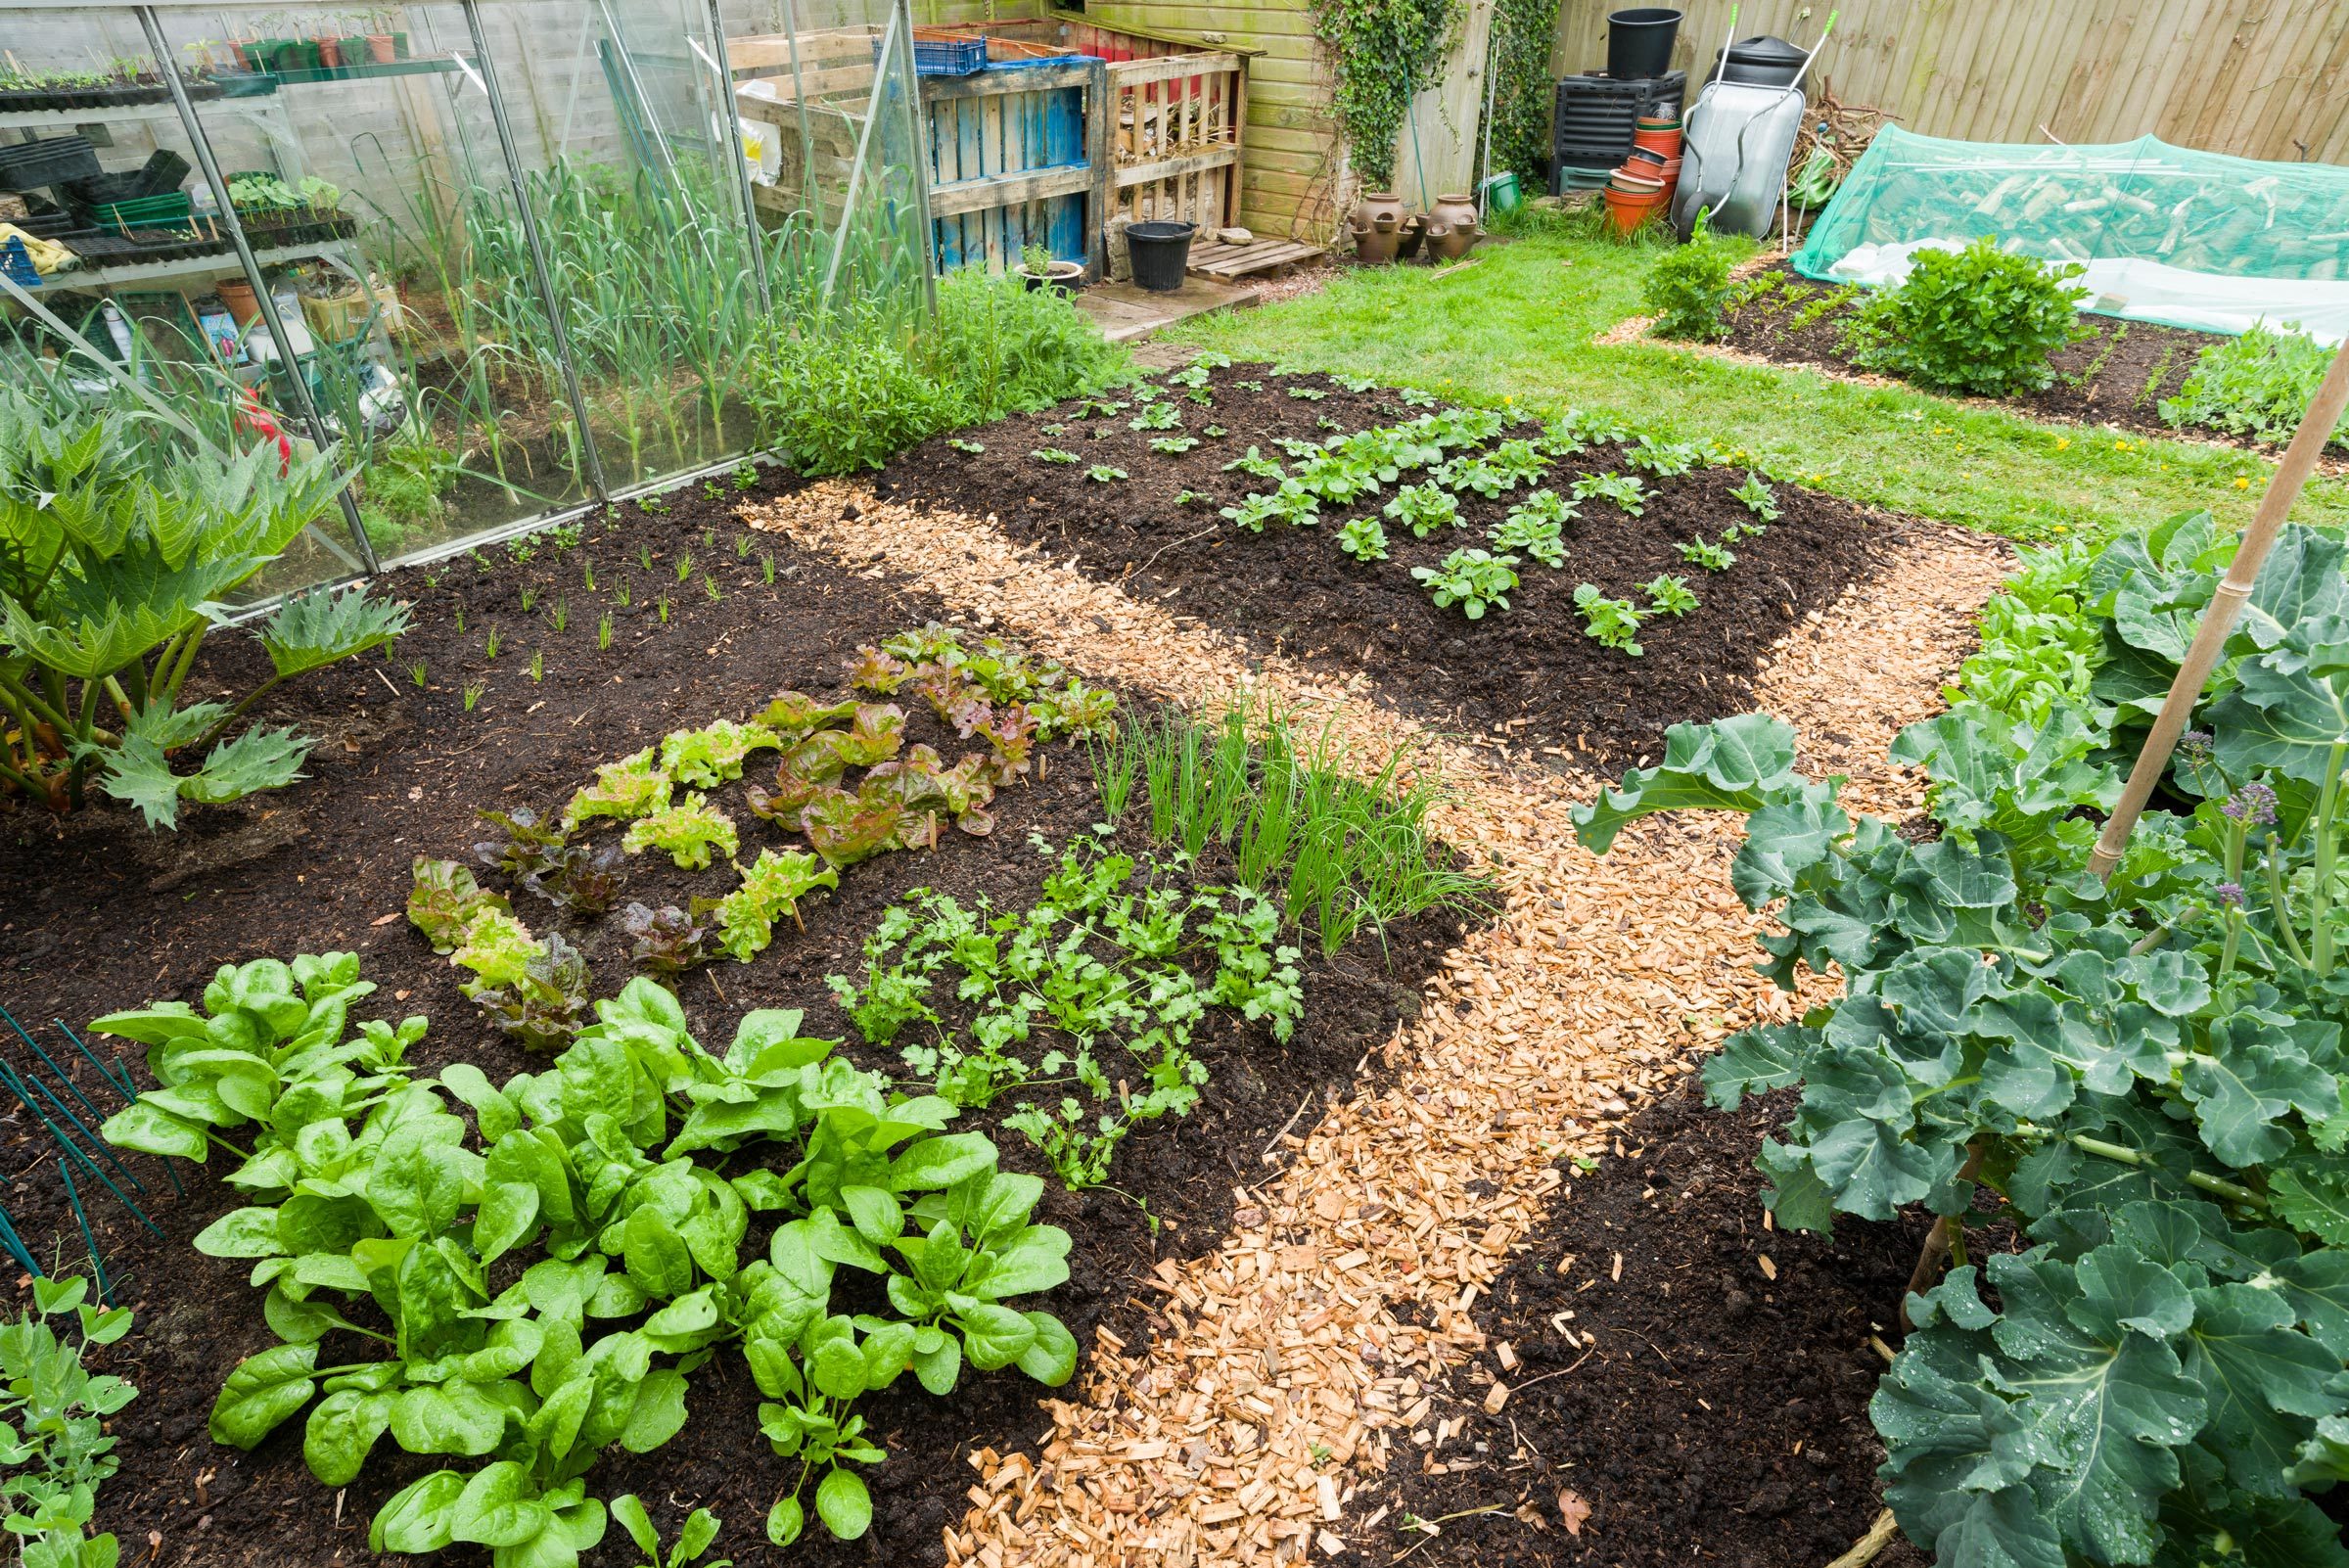 Should I Rotate Crops in My Vegetable Garden?